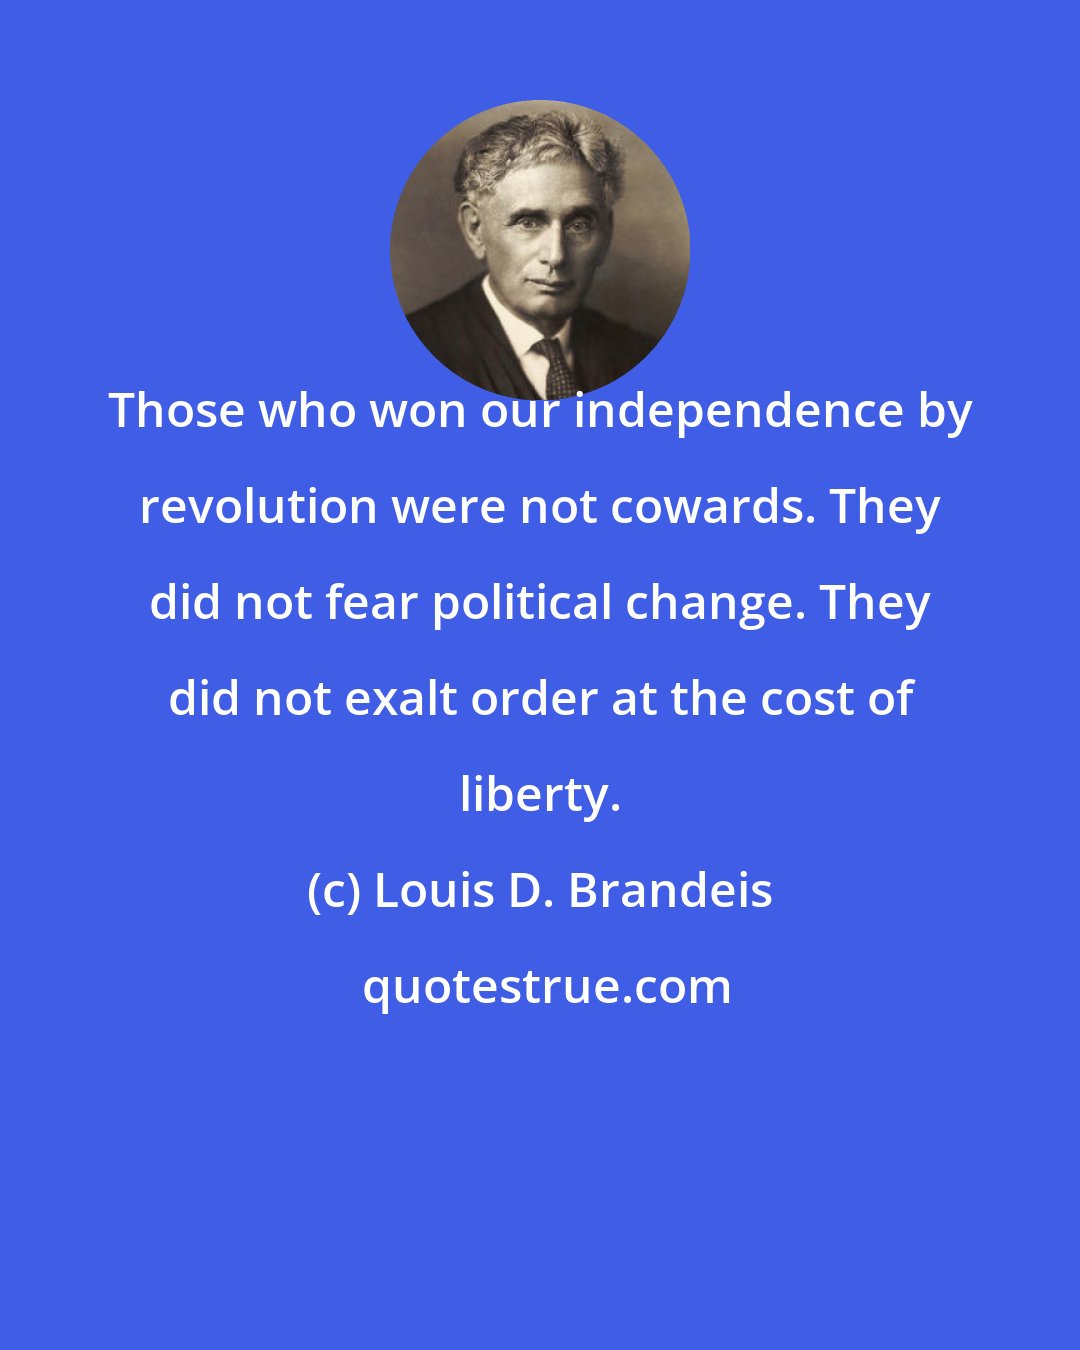 Louis D. Brandeis: Those who won our independence by revolution were not cowards. They did not fear political change. They did not exalt order at the cost of liberty.